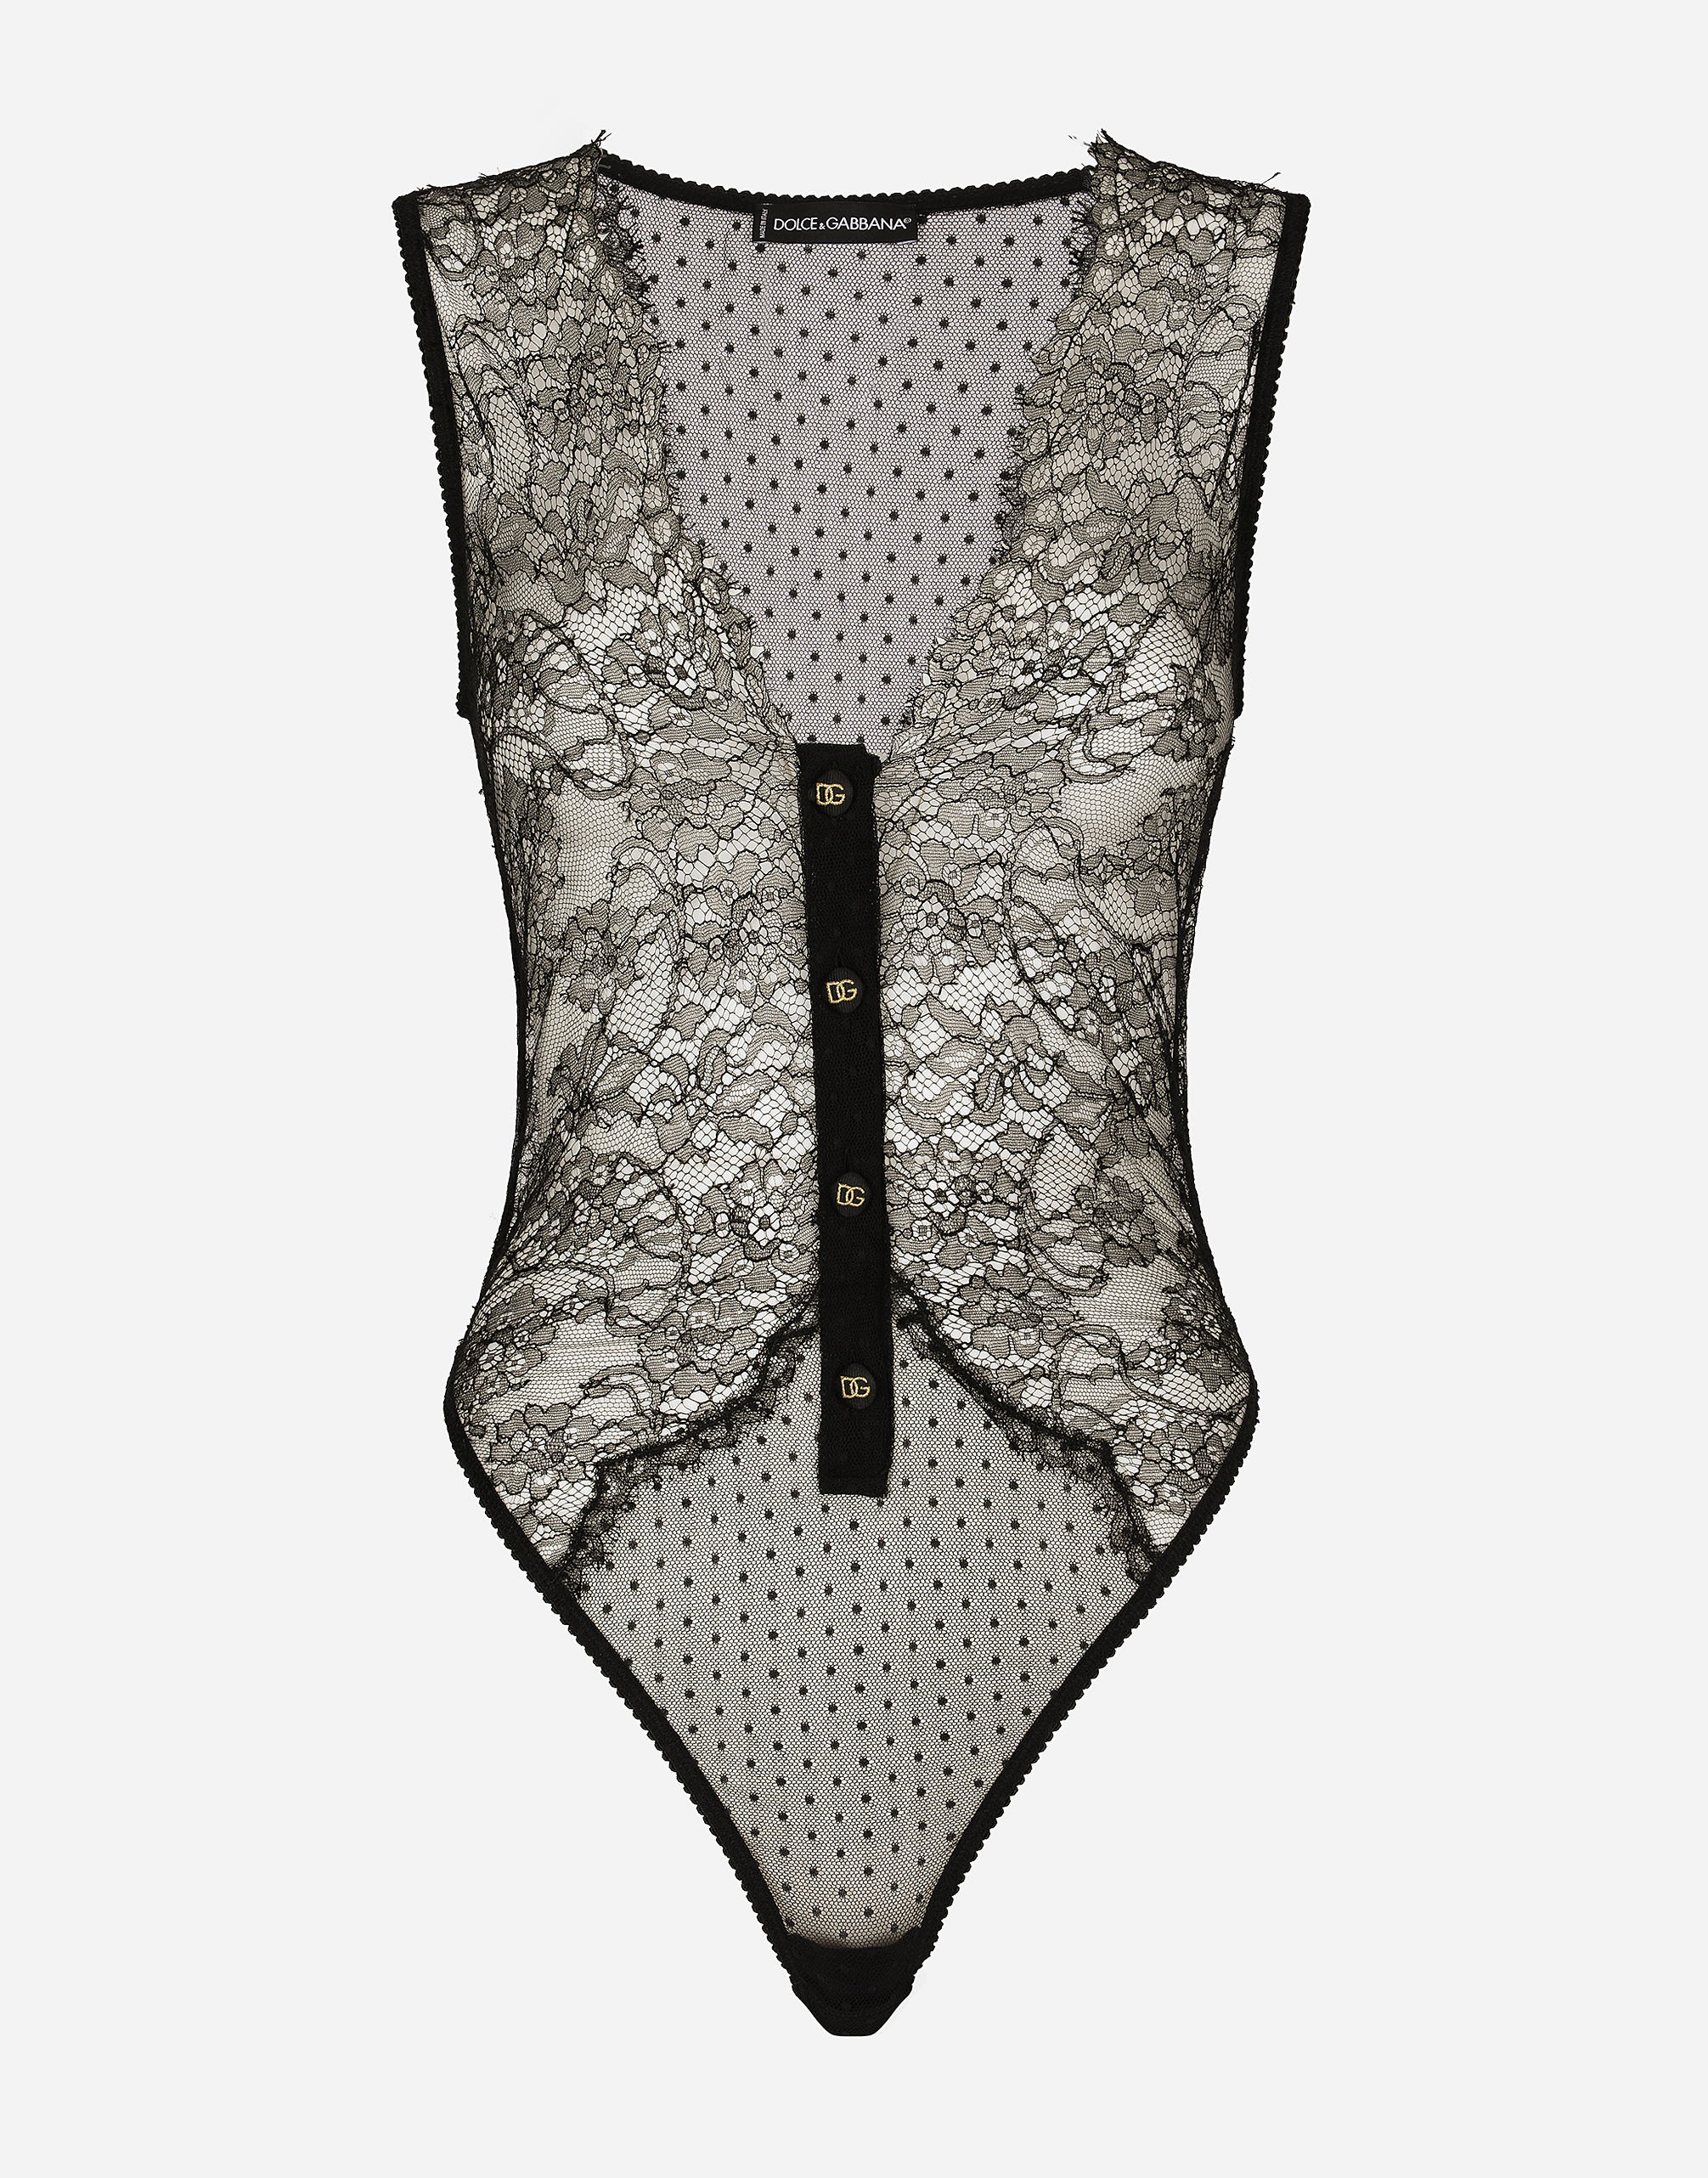 Lace bodysuit with plunging neckline